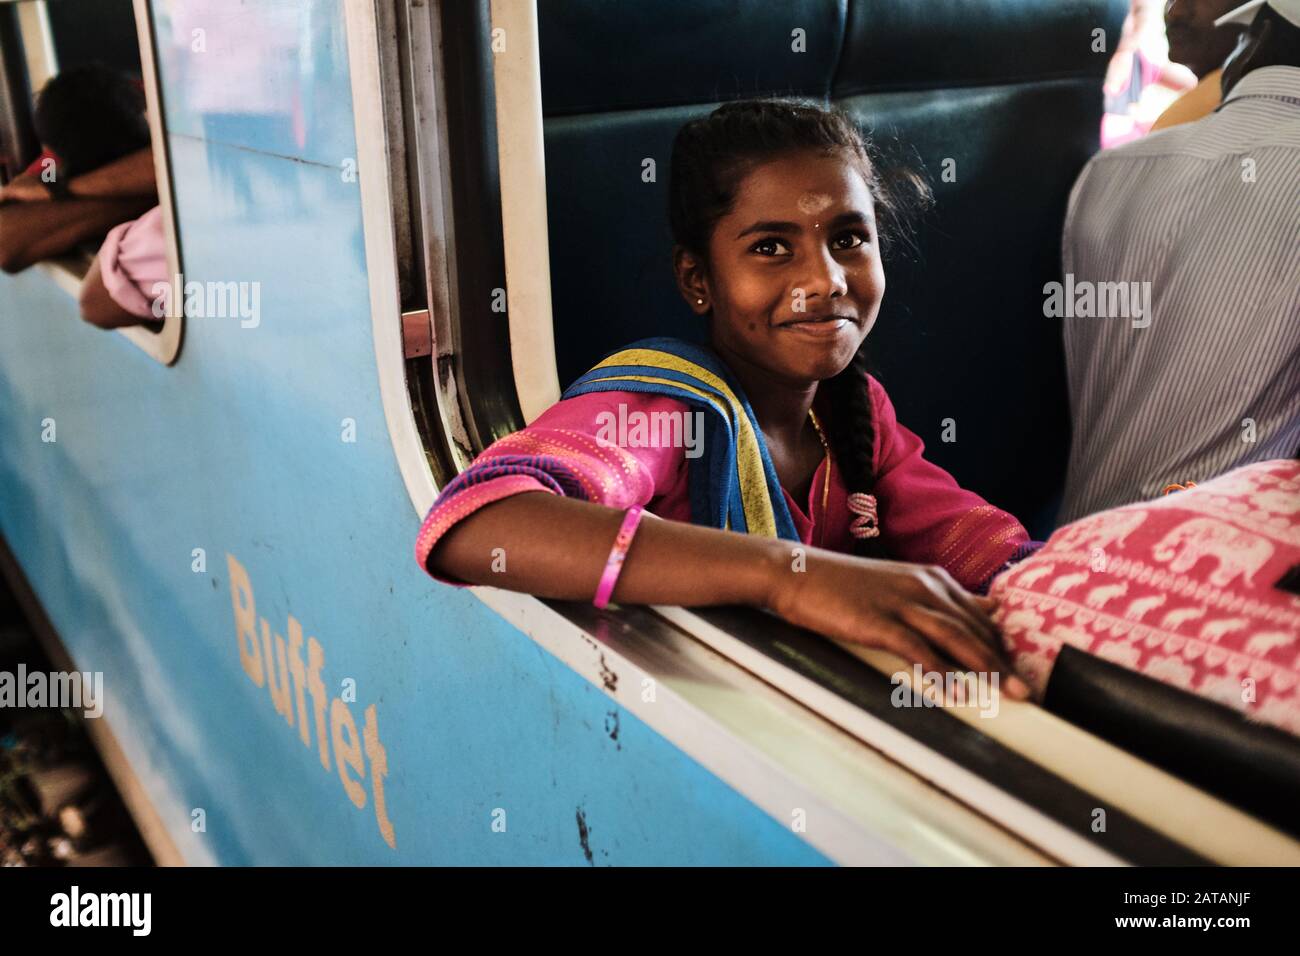 A young girl sitting on a train in Sri lanka and smilig. Stock Photo